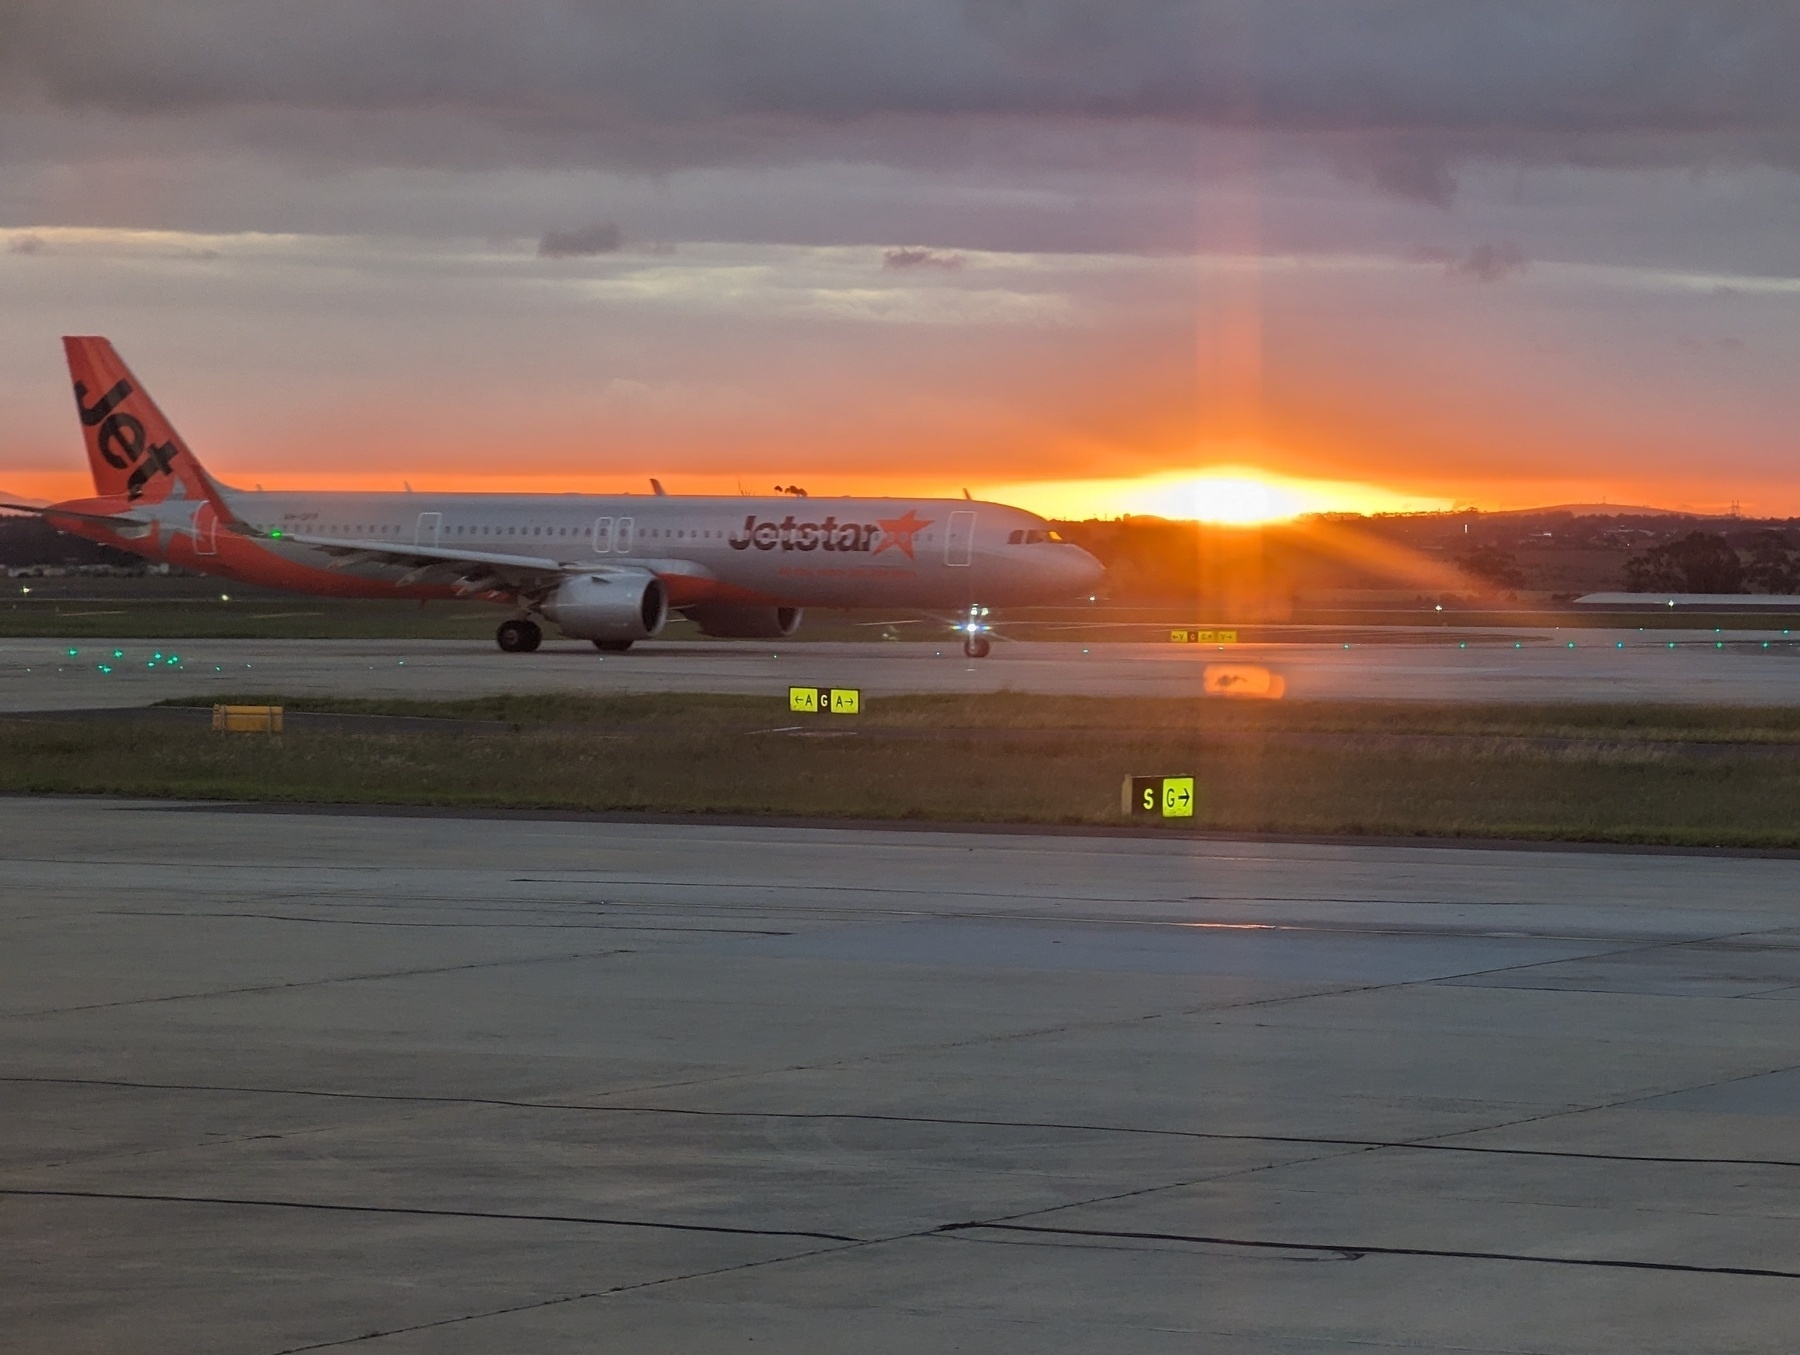 Airplane taxing at an airport with an orange sunset flaring near the nose.